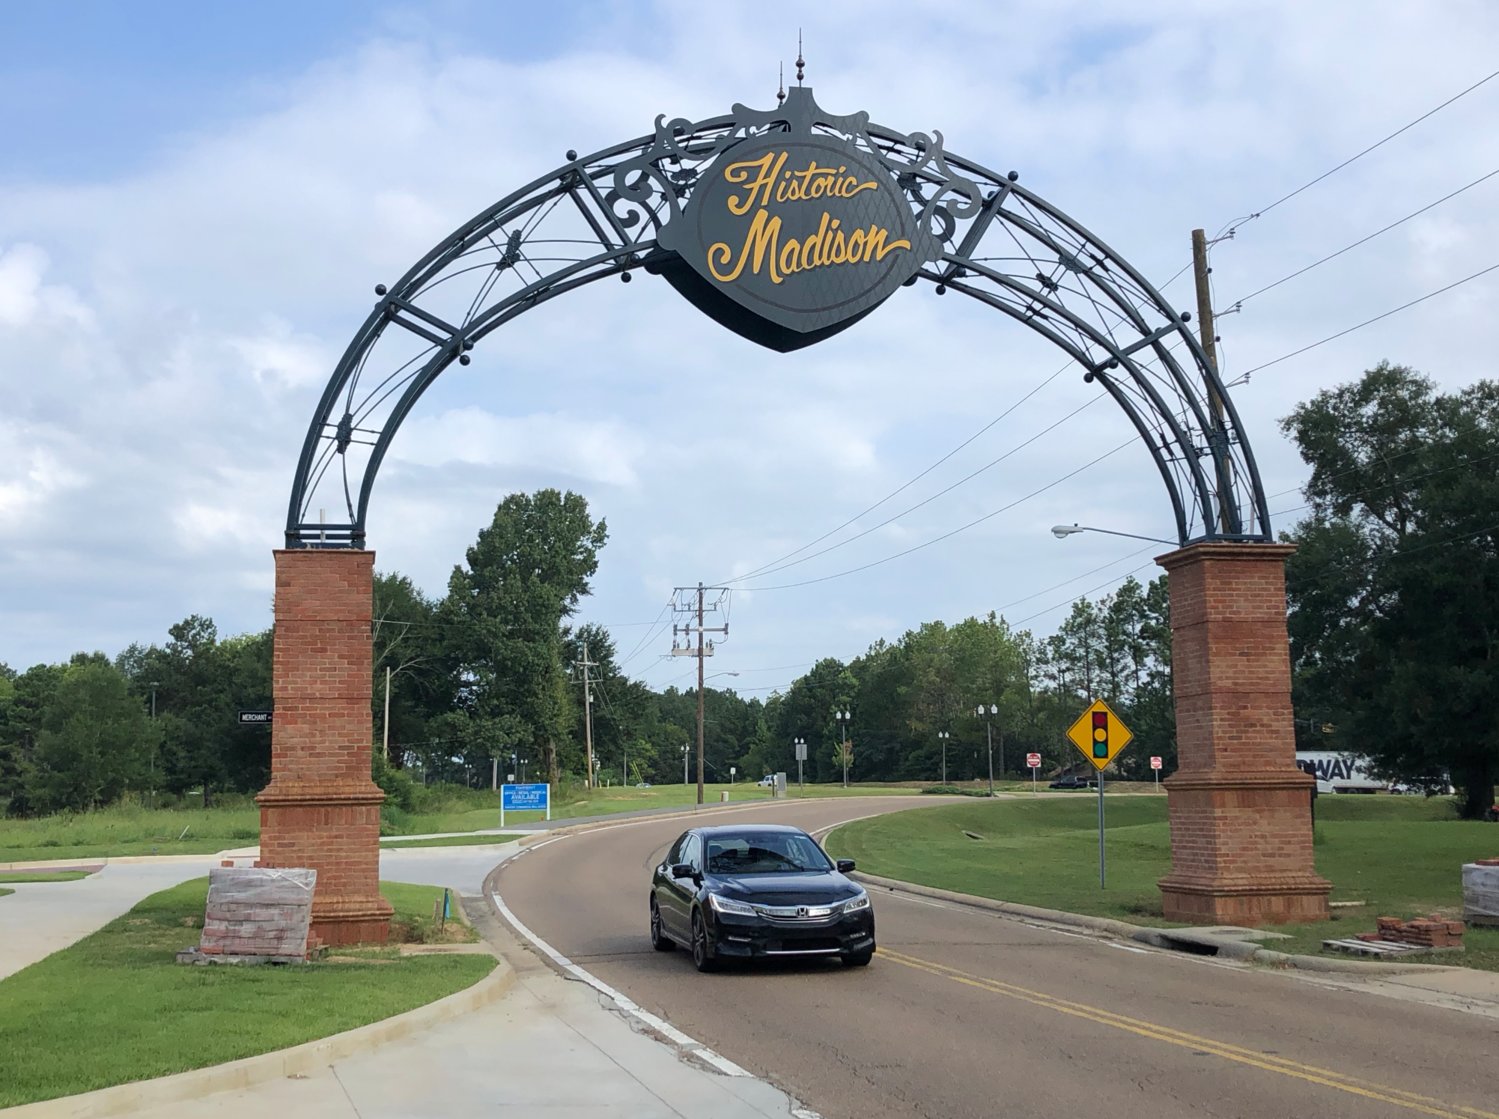 A brick archway was erected at the Village of Madison development.